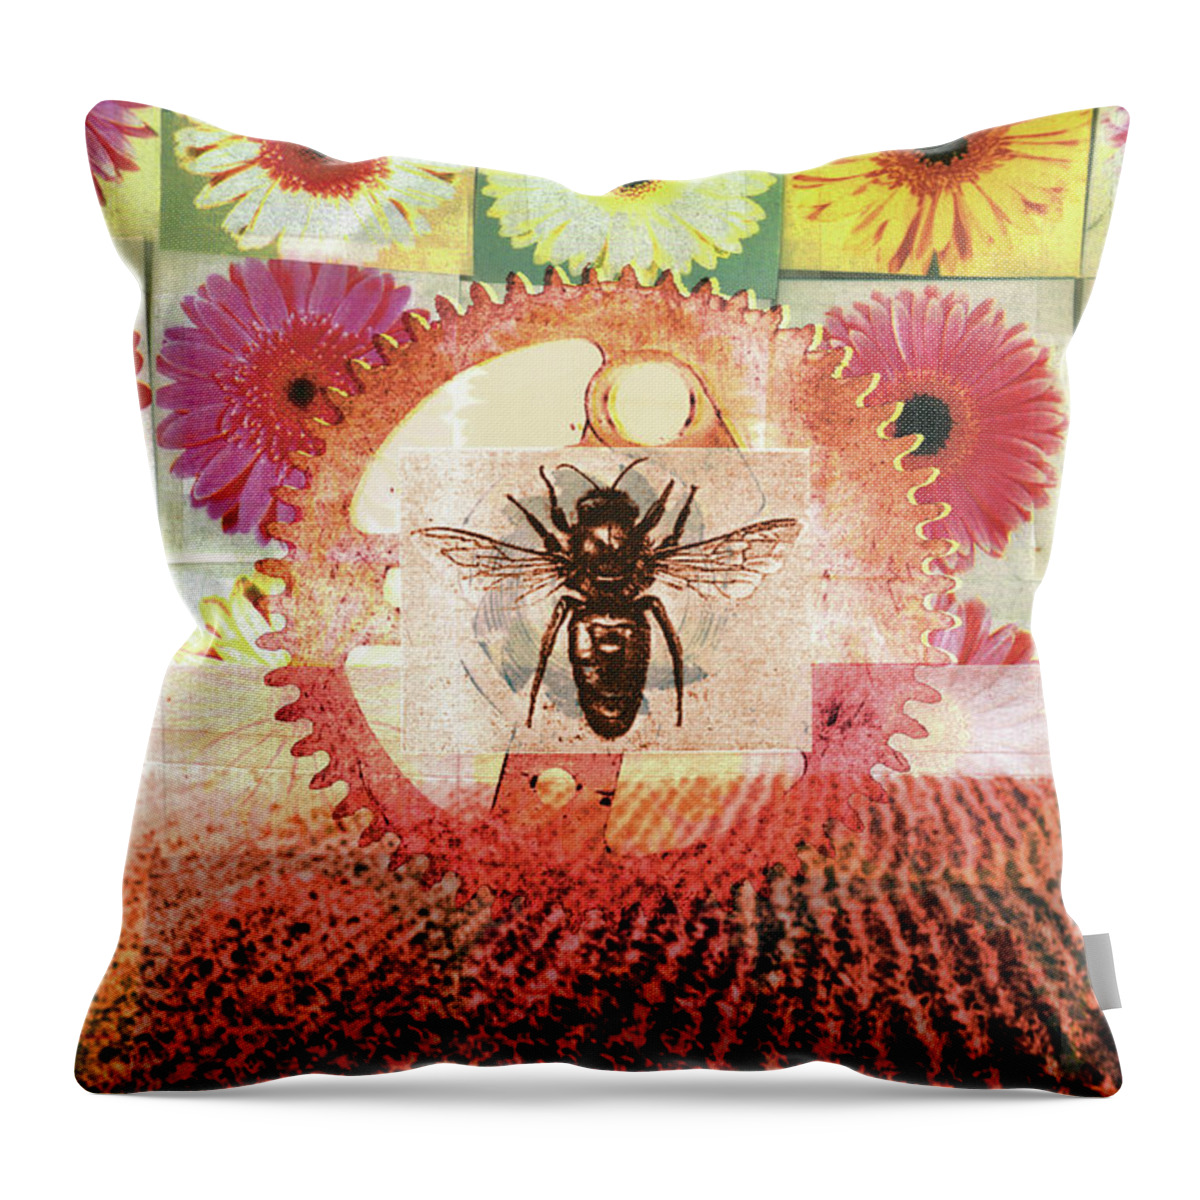 Agriculture Throw Pillow featuring the photograph Collage Of Flowers, Bee, Cog And Field by Ikon Ikon Images